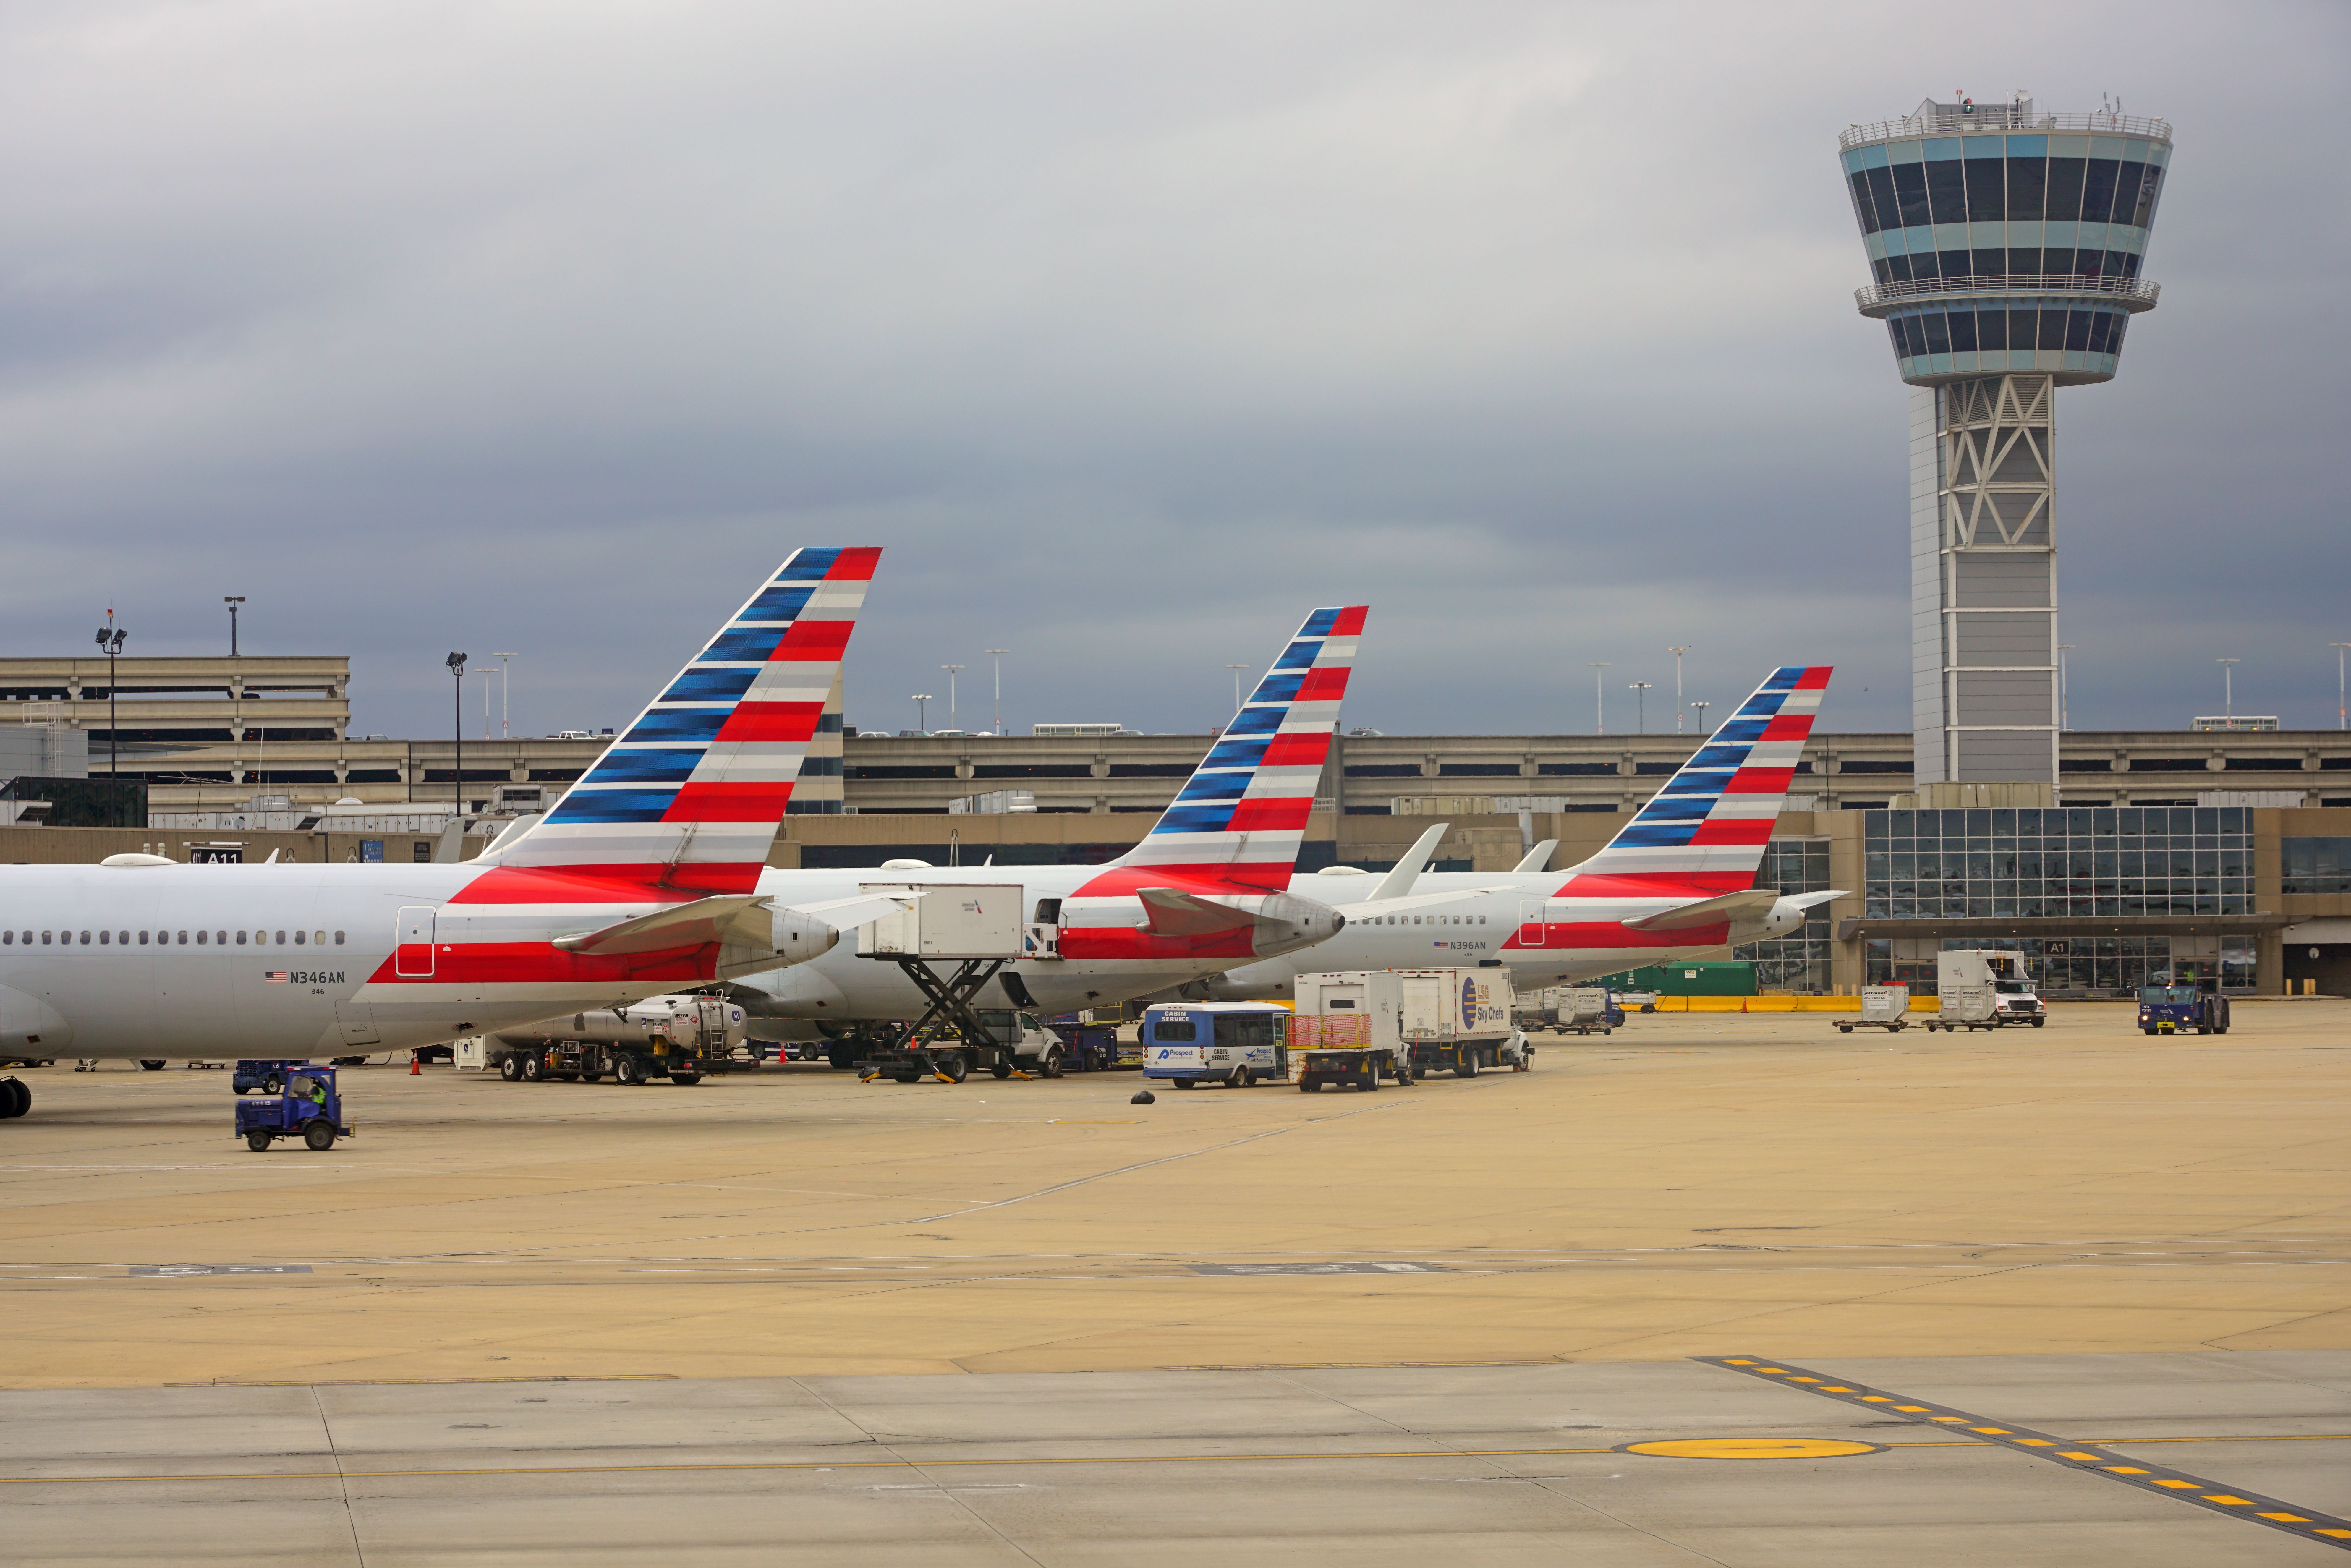 Three American Airlines aircraft parked side by side on an airport apron.